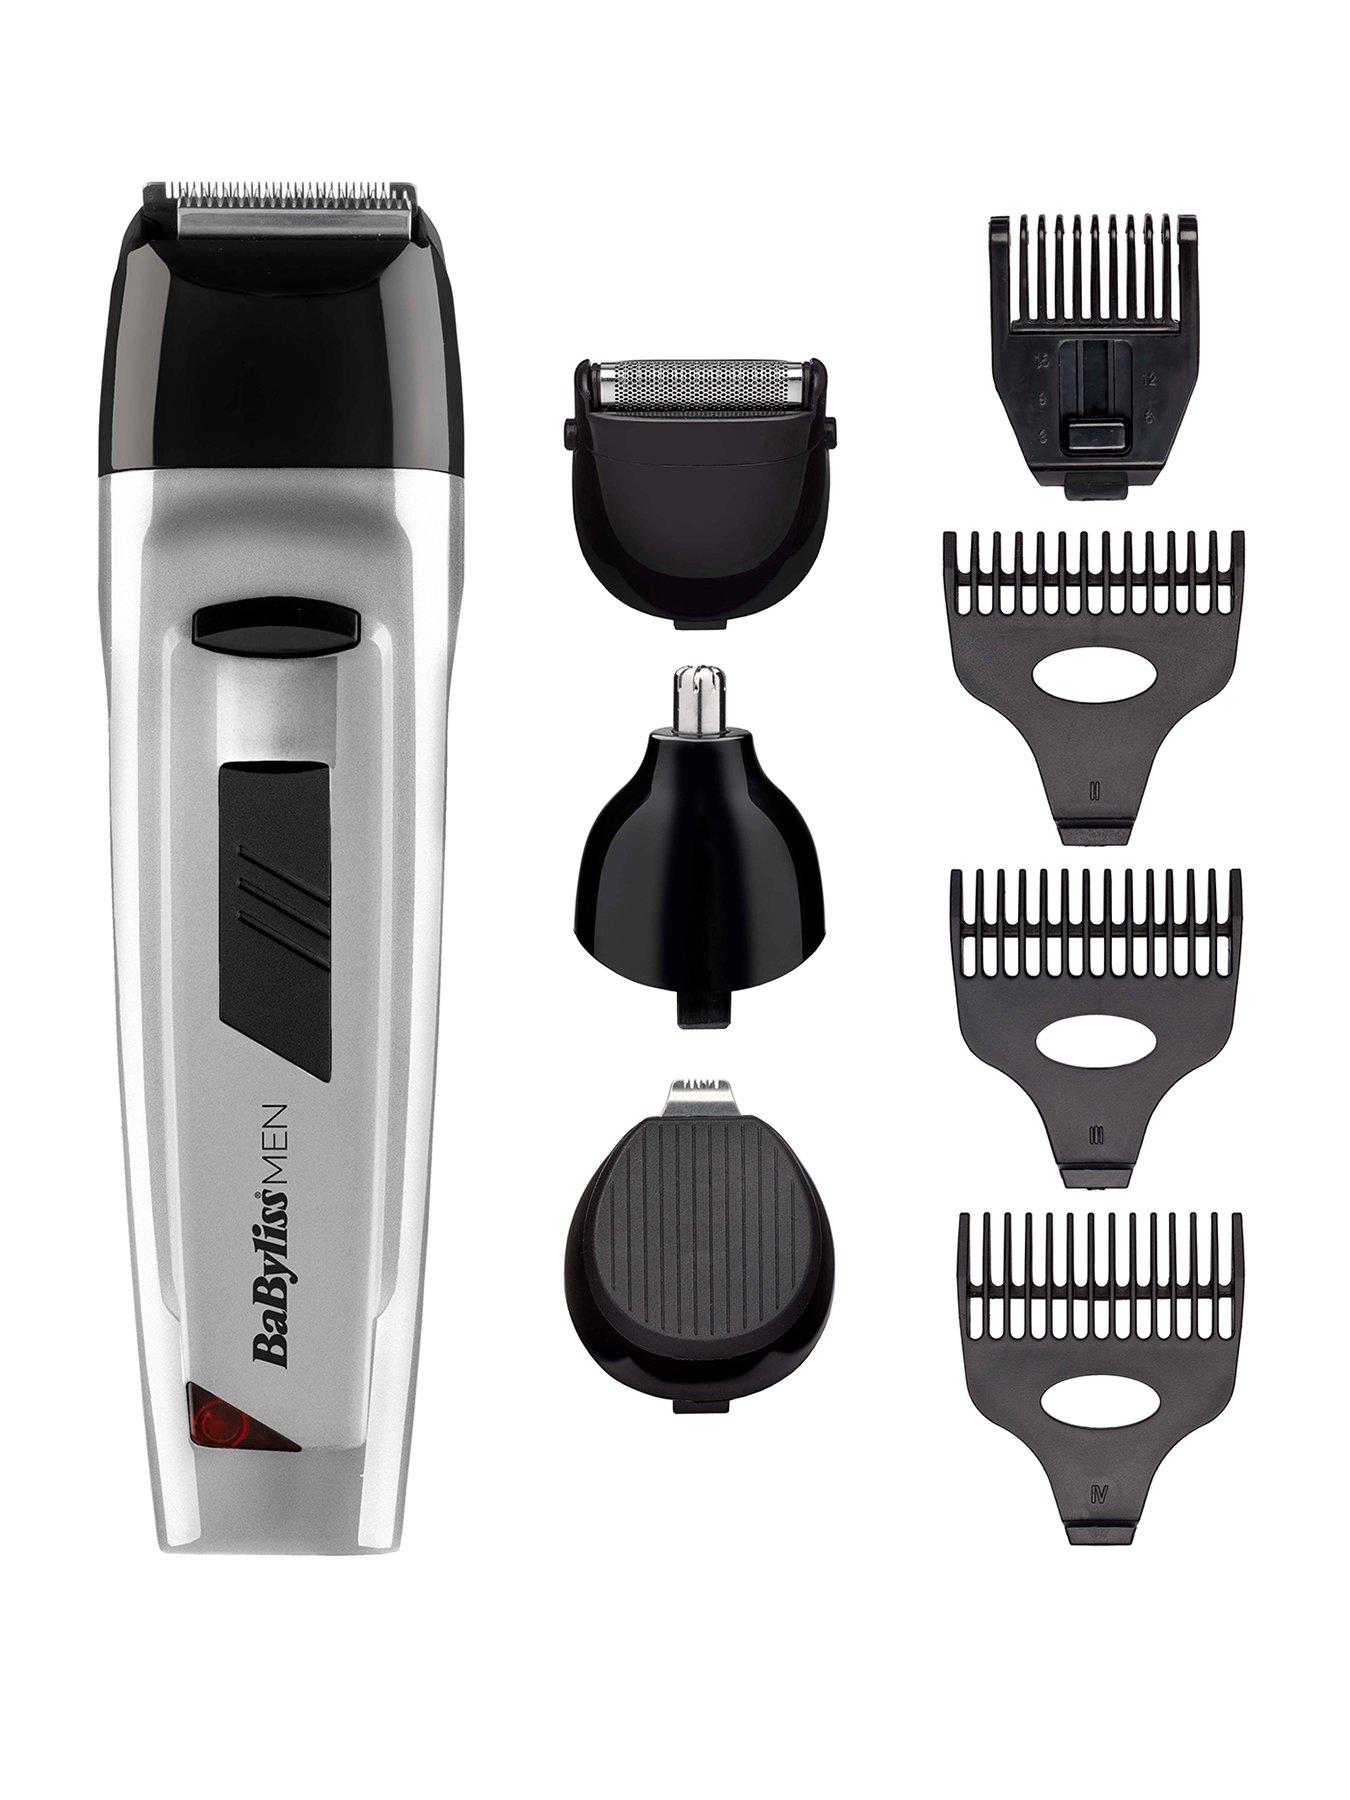 mens clippers ireland